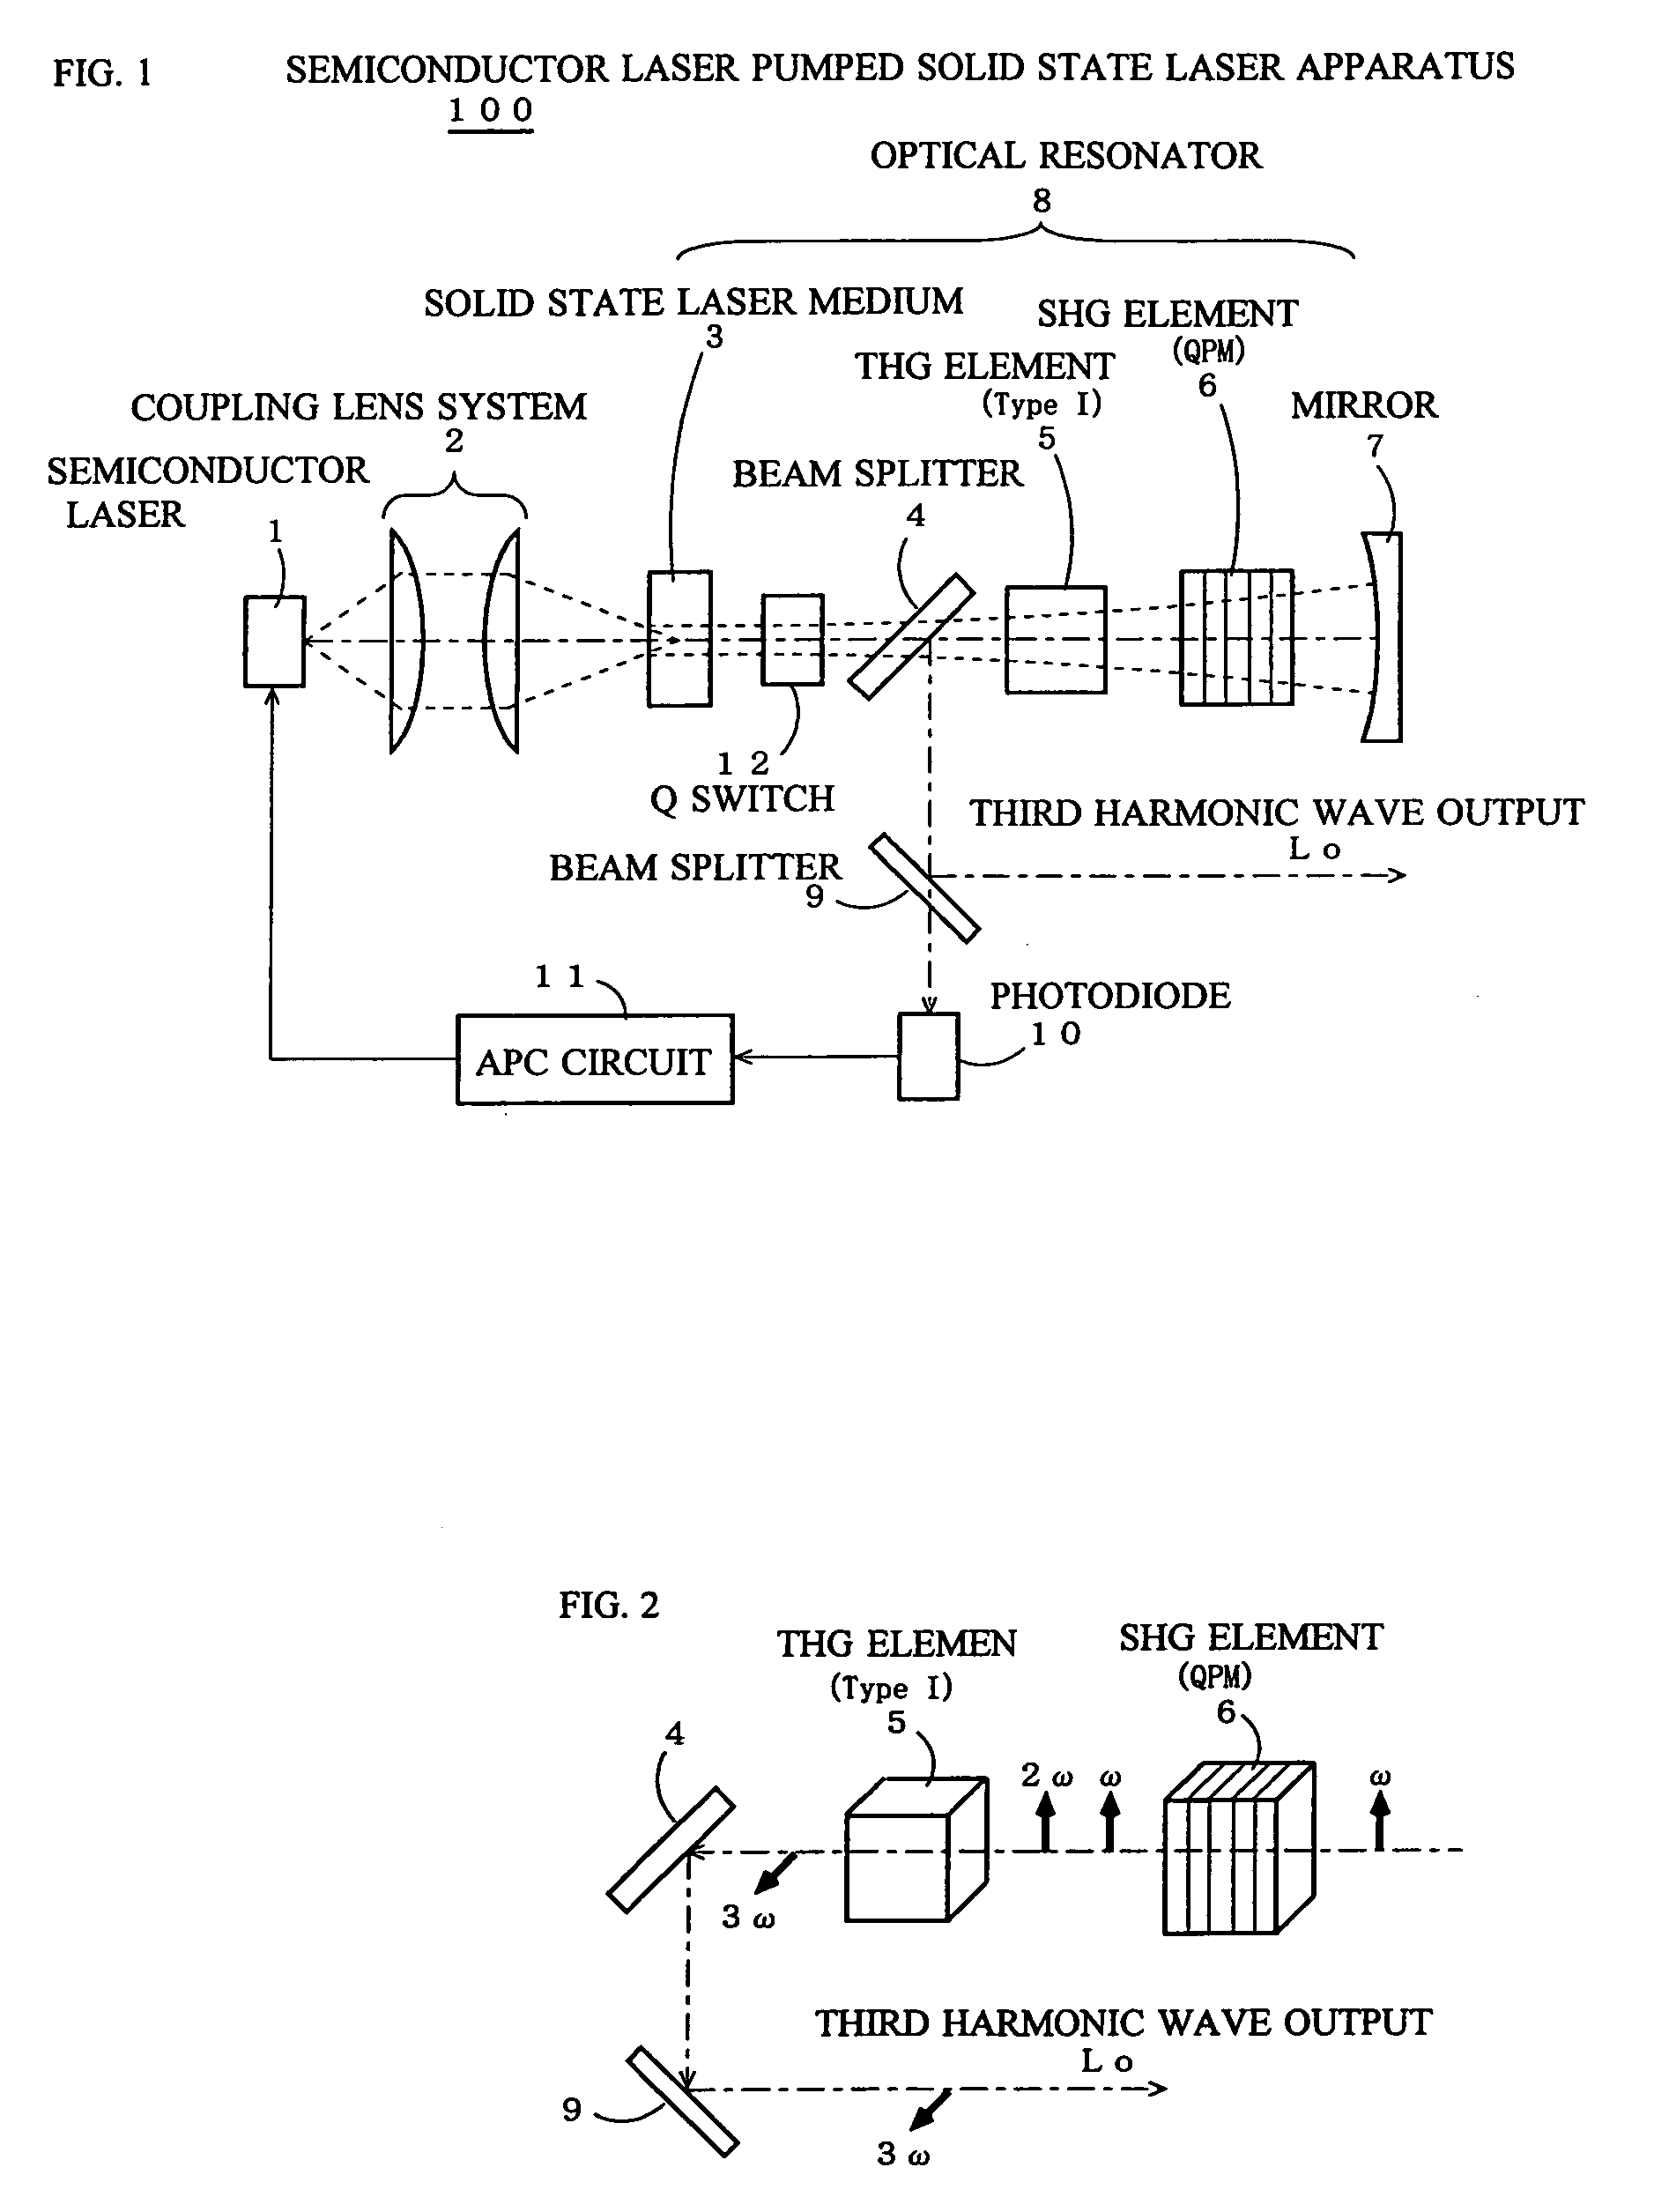 Semiconductor laser excited solid-state laser device